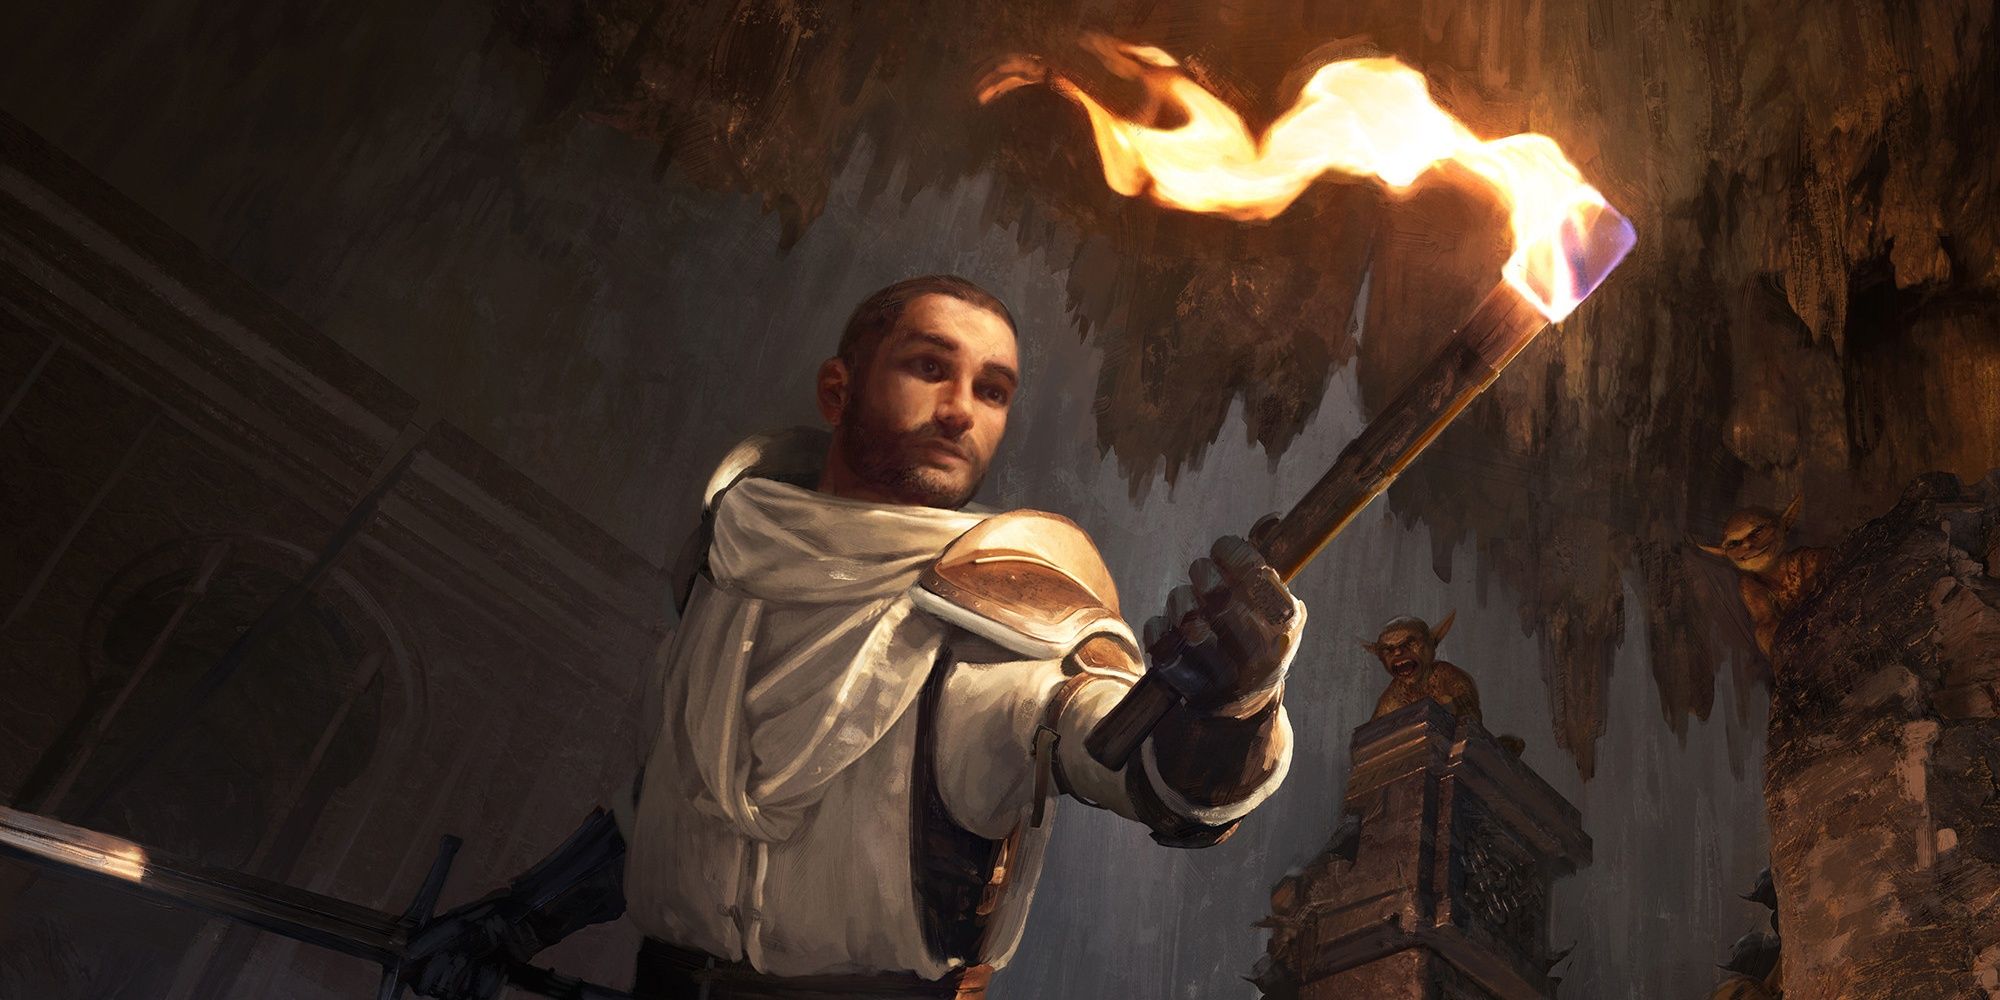 Dungeons & Dragons: In Bram Sels' Torch of Delver, an adventurer with a torch is surprised by dwarves